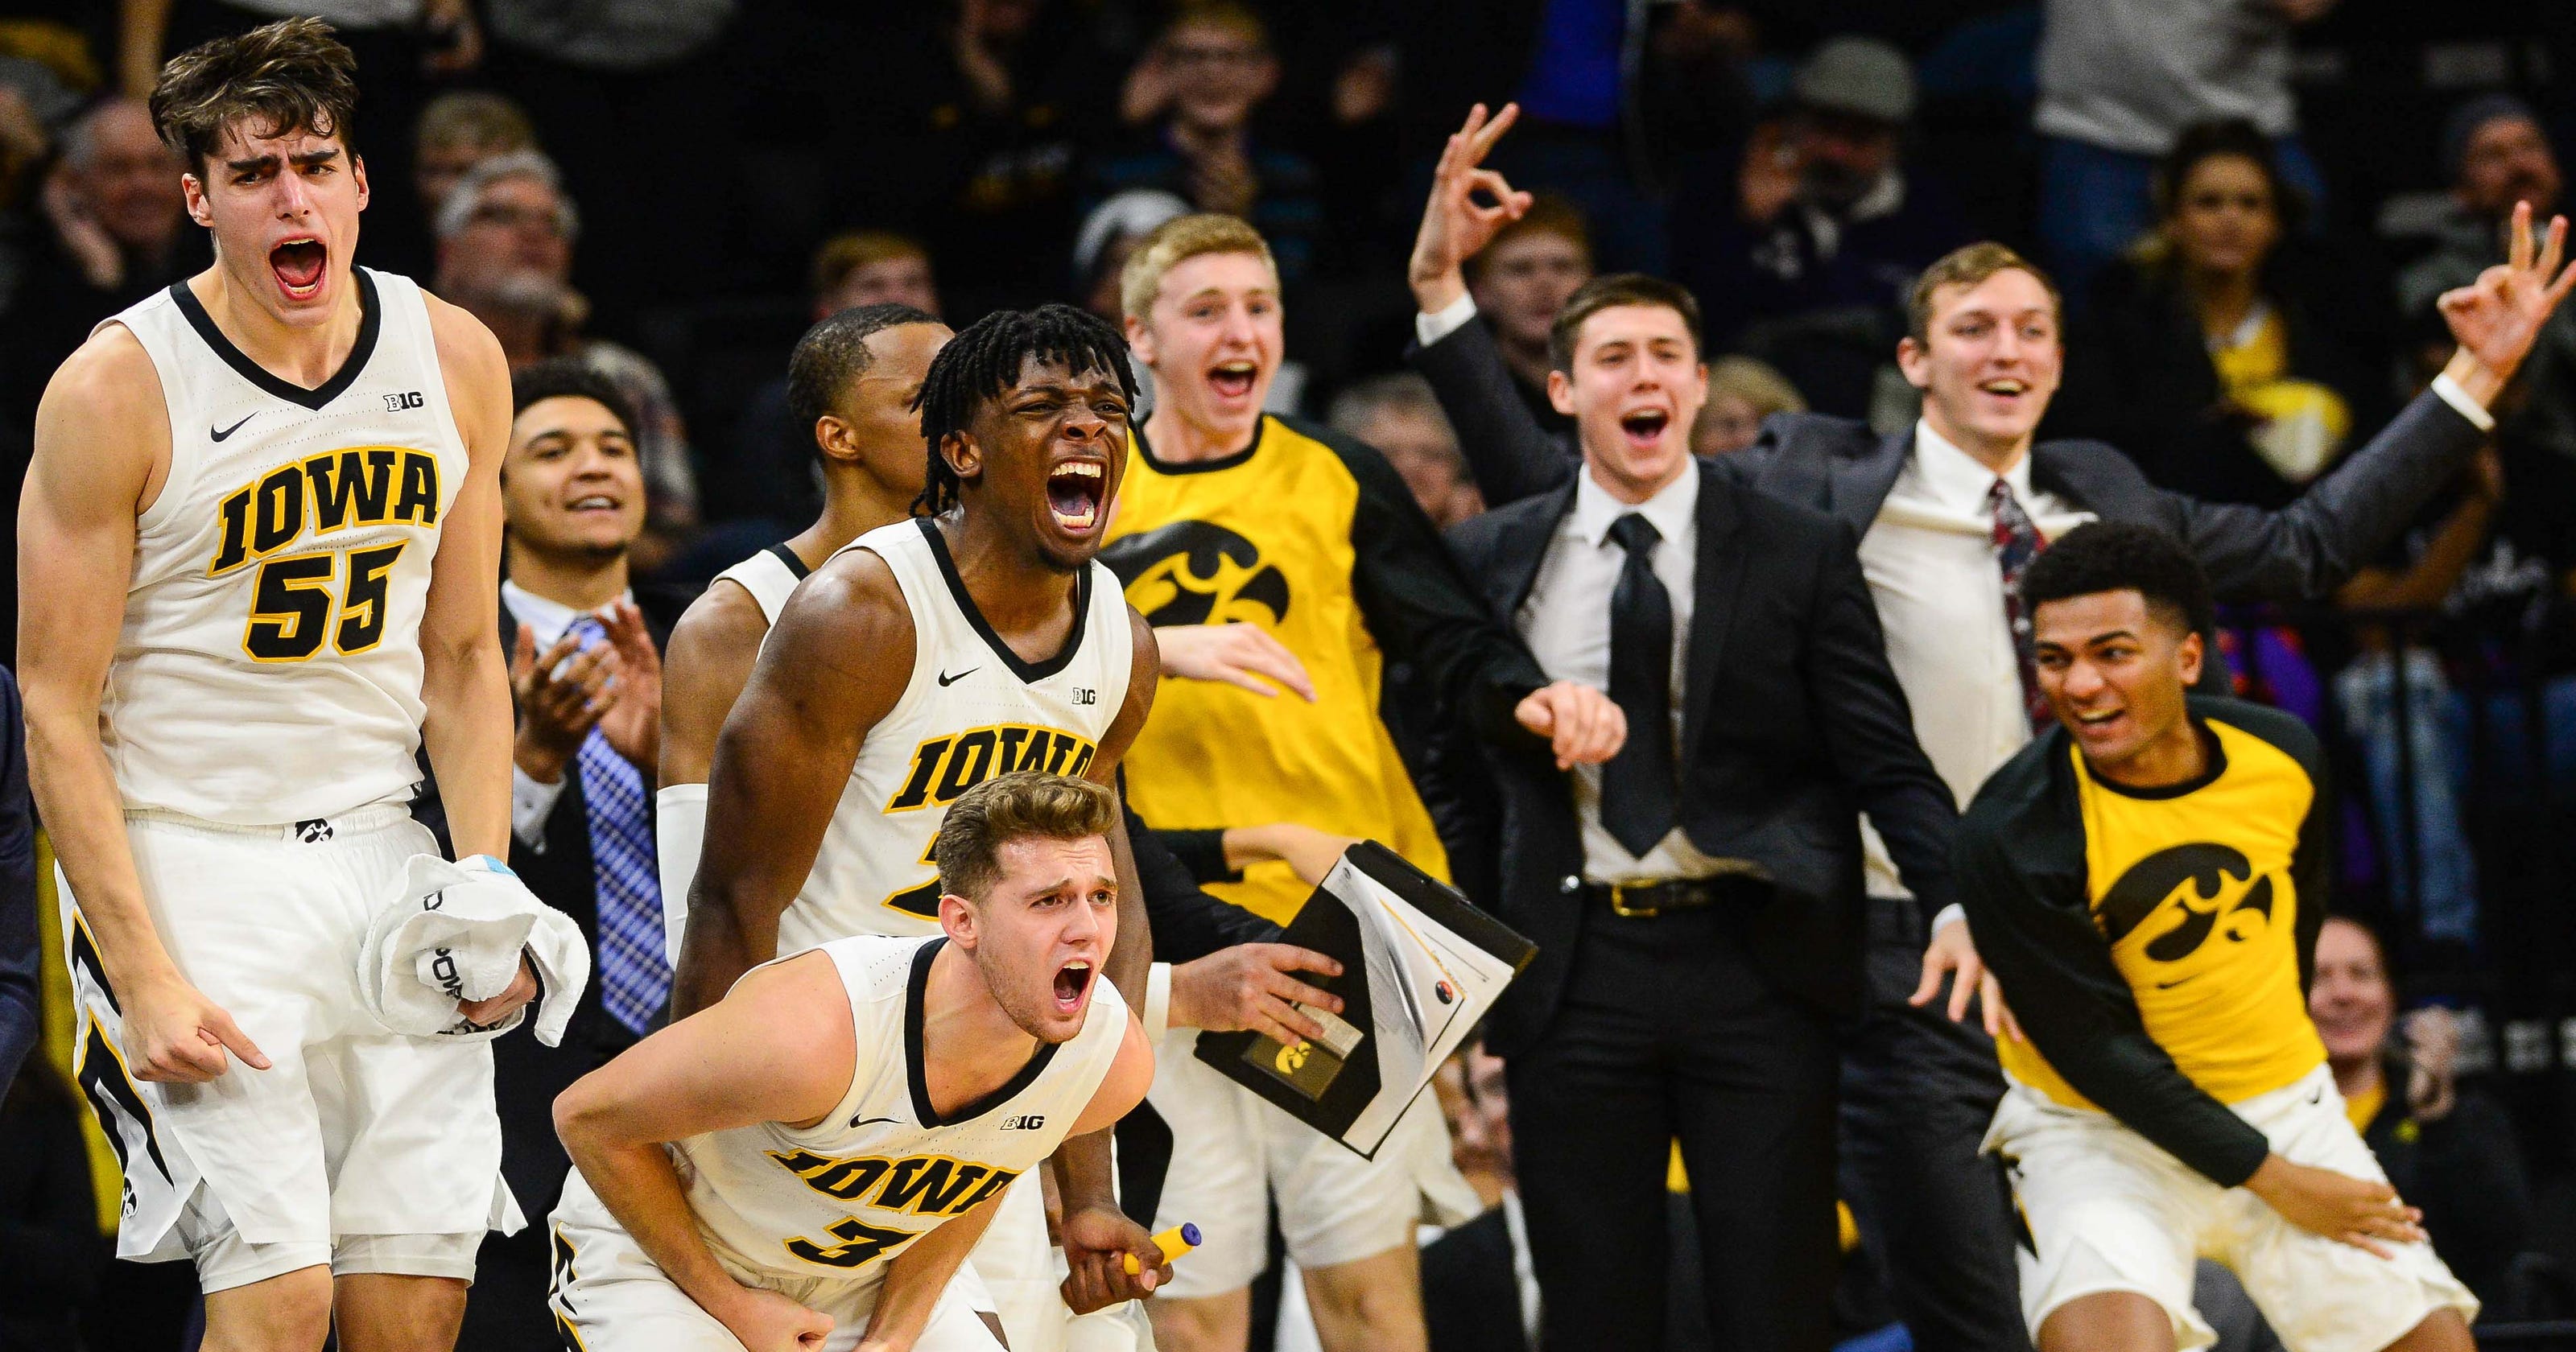 Iowa Men's Basketball Schedule Examples and Forms